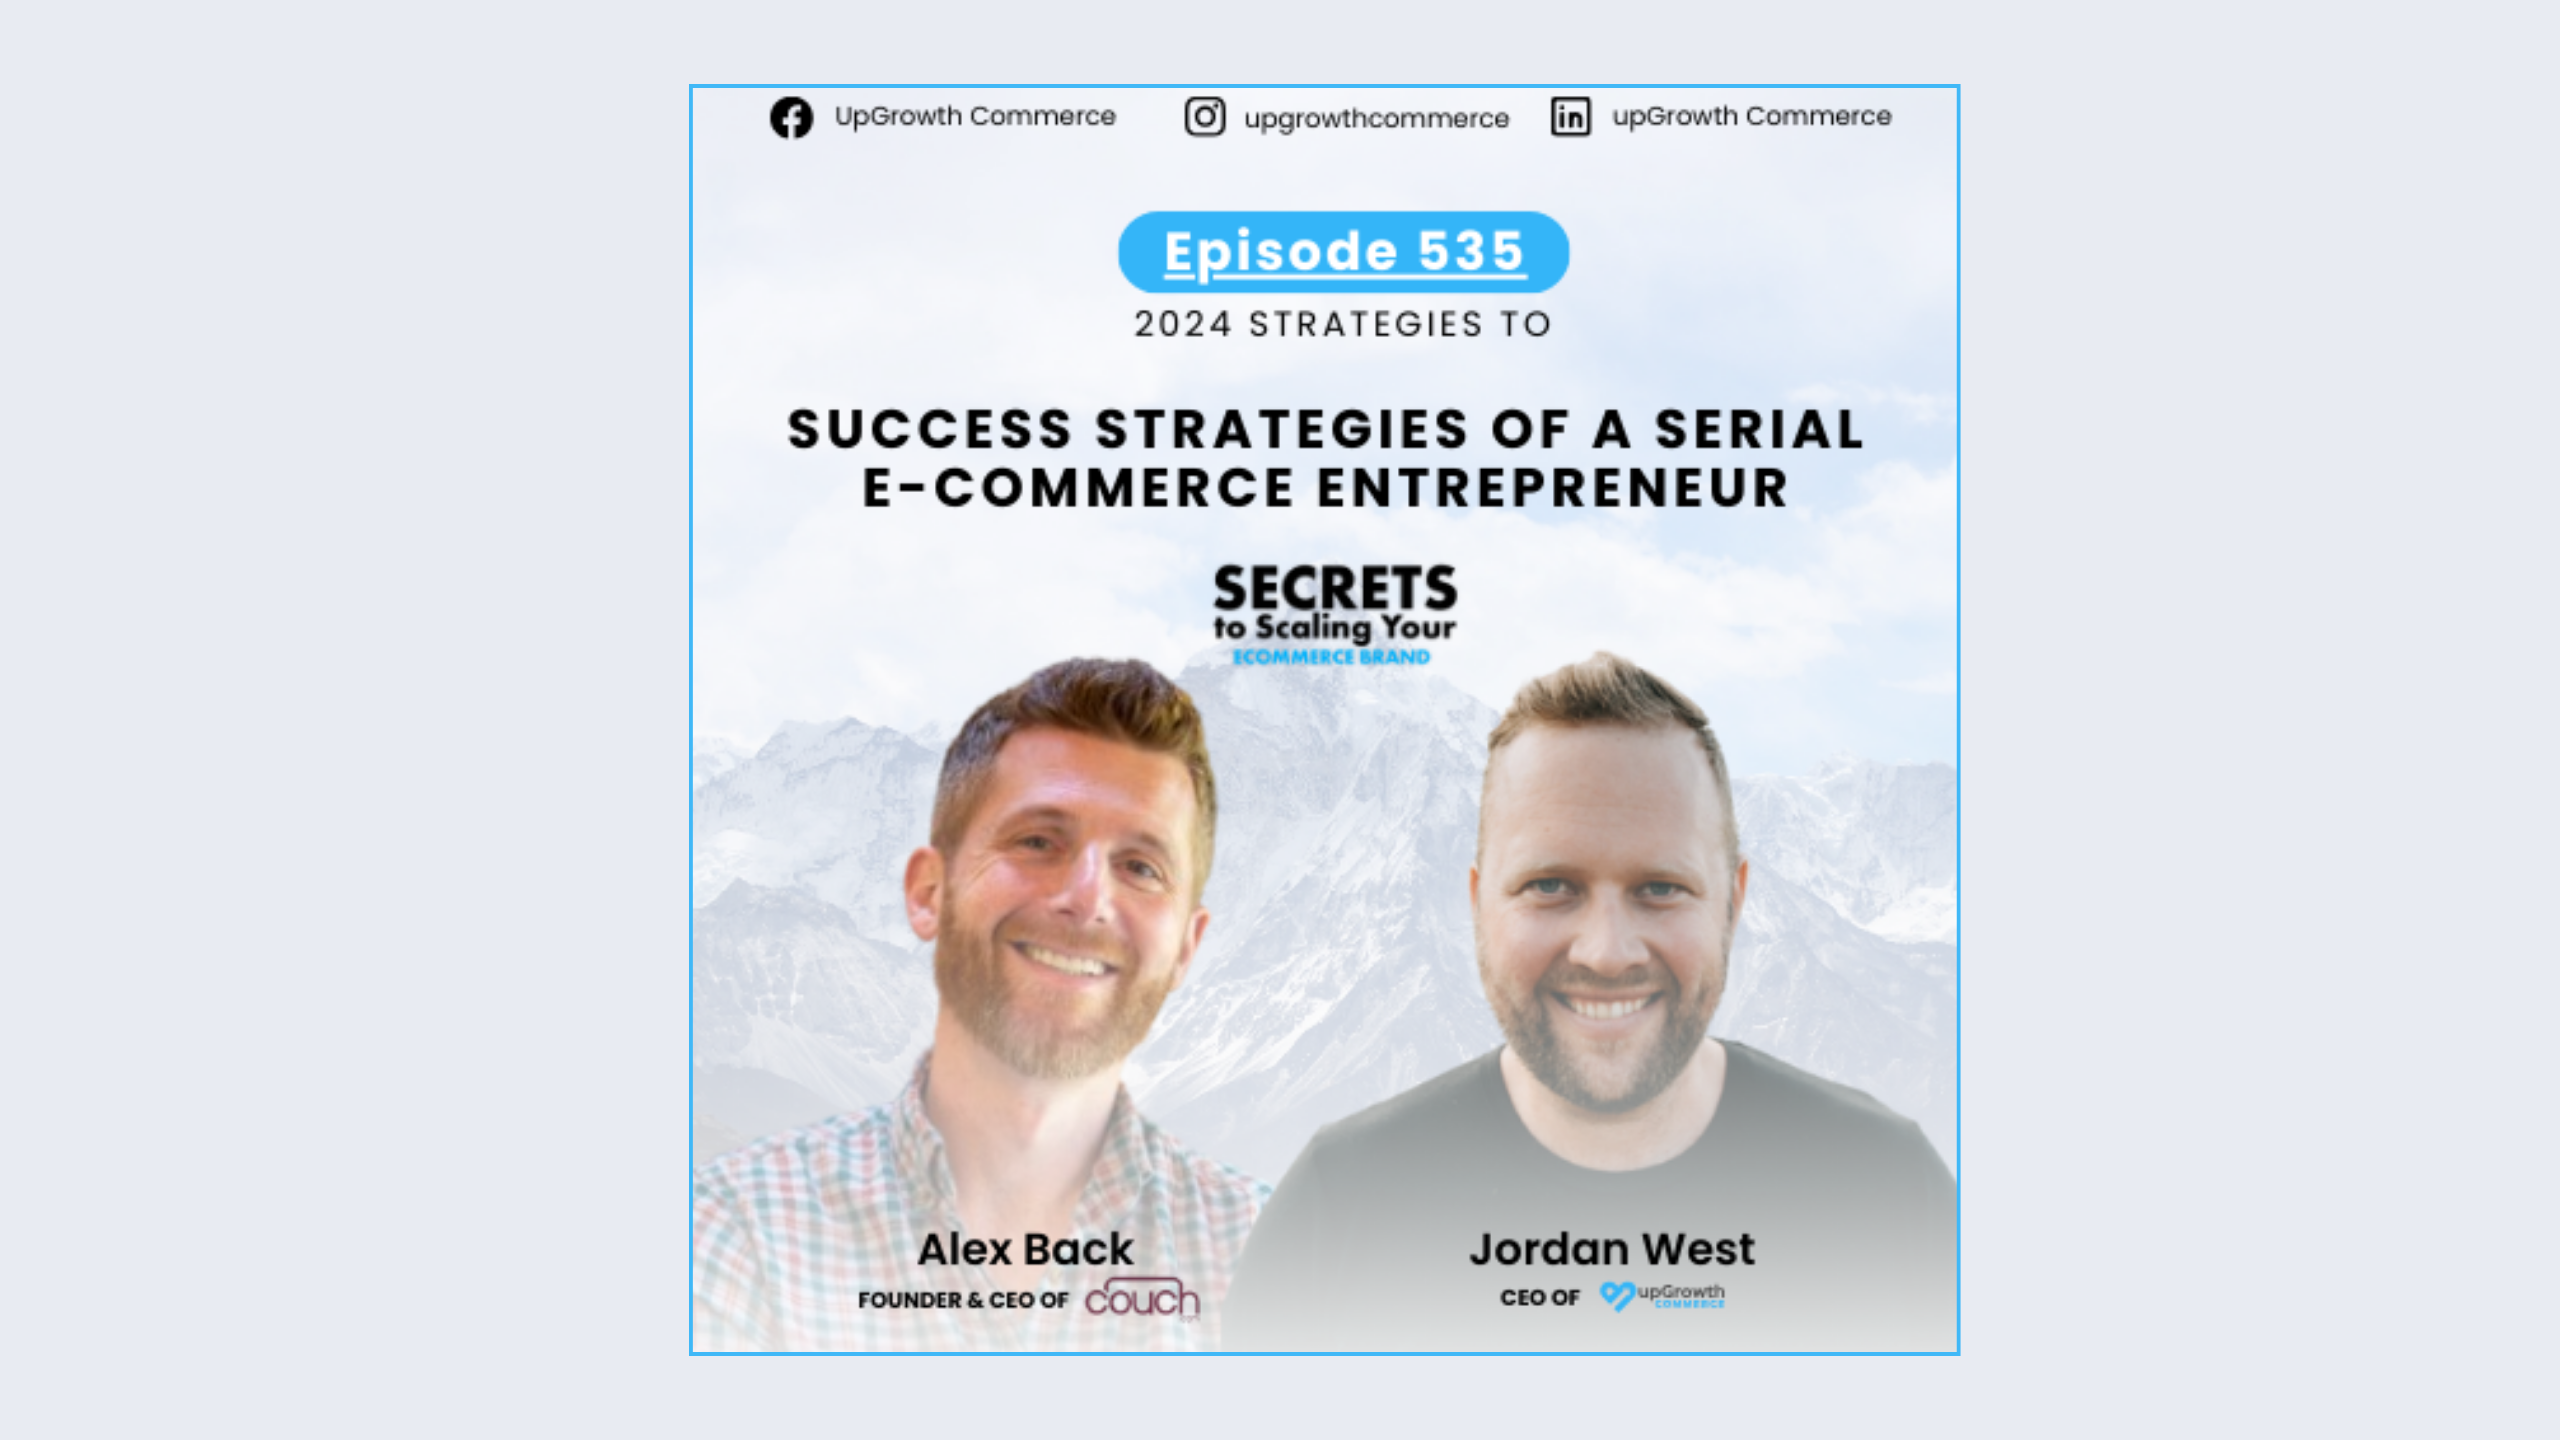 Podcast episode cover with the text: "Episode 535: 2024 Strategies To Success Strategies Of A Serial E-Commerce Entrepreneur. Secrets To Scaling Your E-Commerce Brand." Two men are pictured; the left is labeled "Alex Back, Founder & CEO of couch" and the right "Jordan West, CEO of Up Growth.